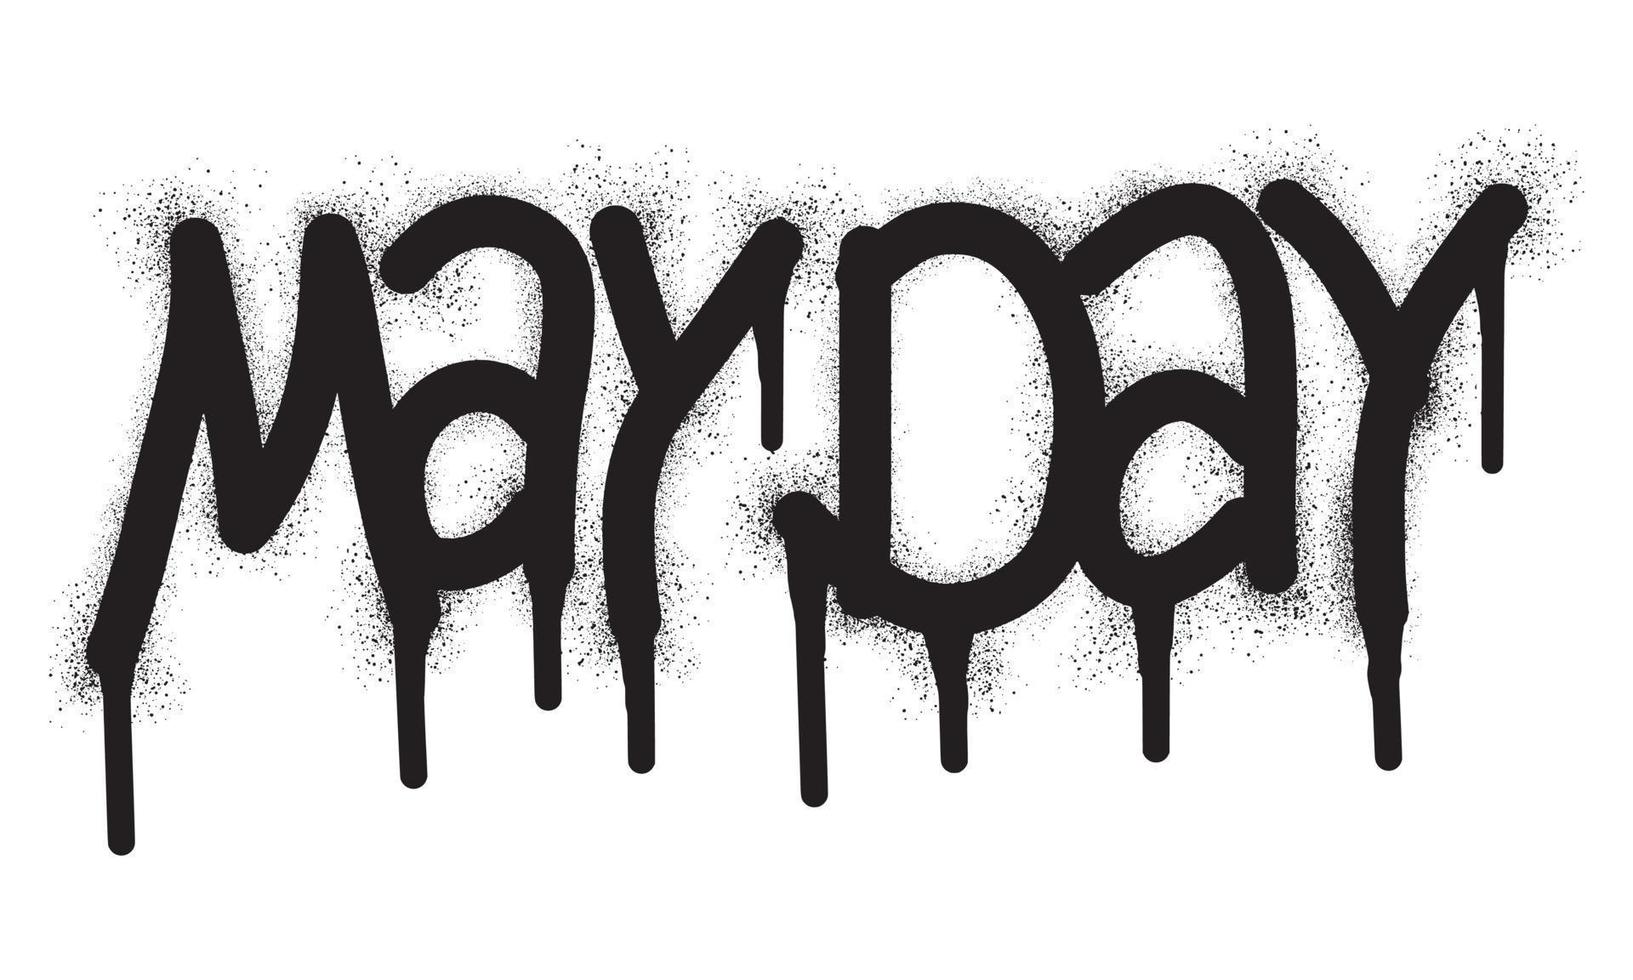 Graffiti mayday text with black spray paint vector